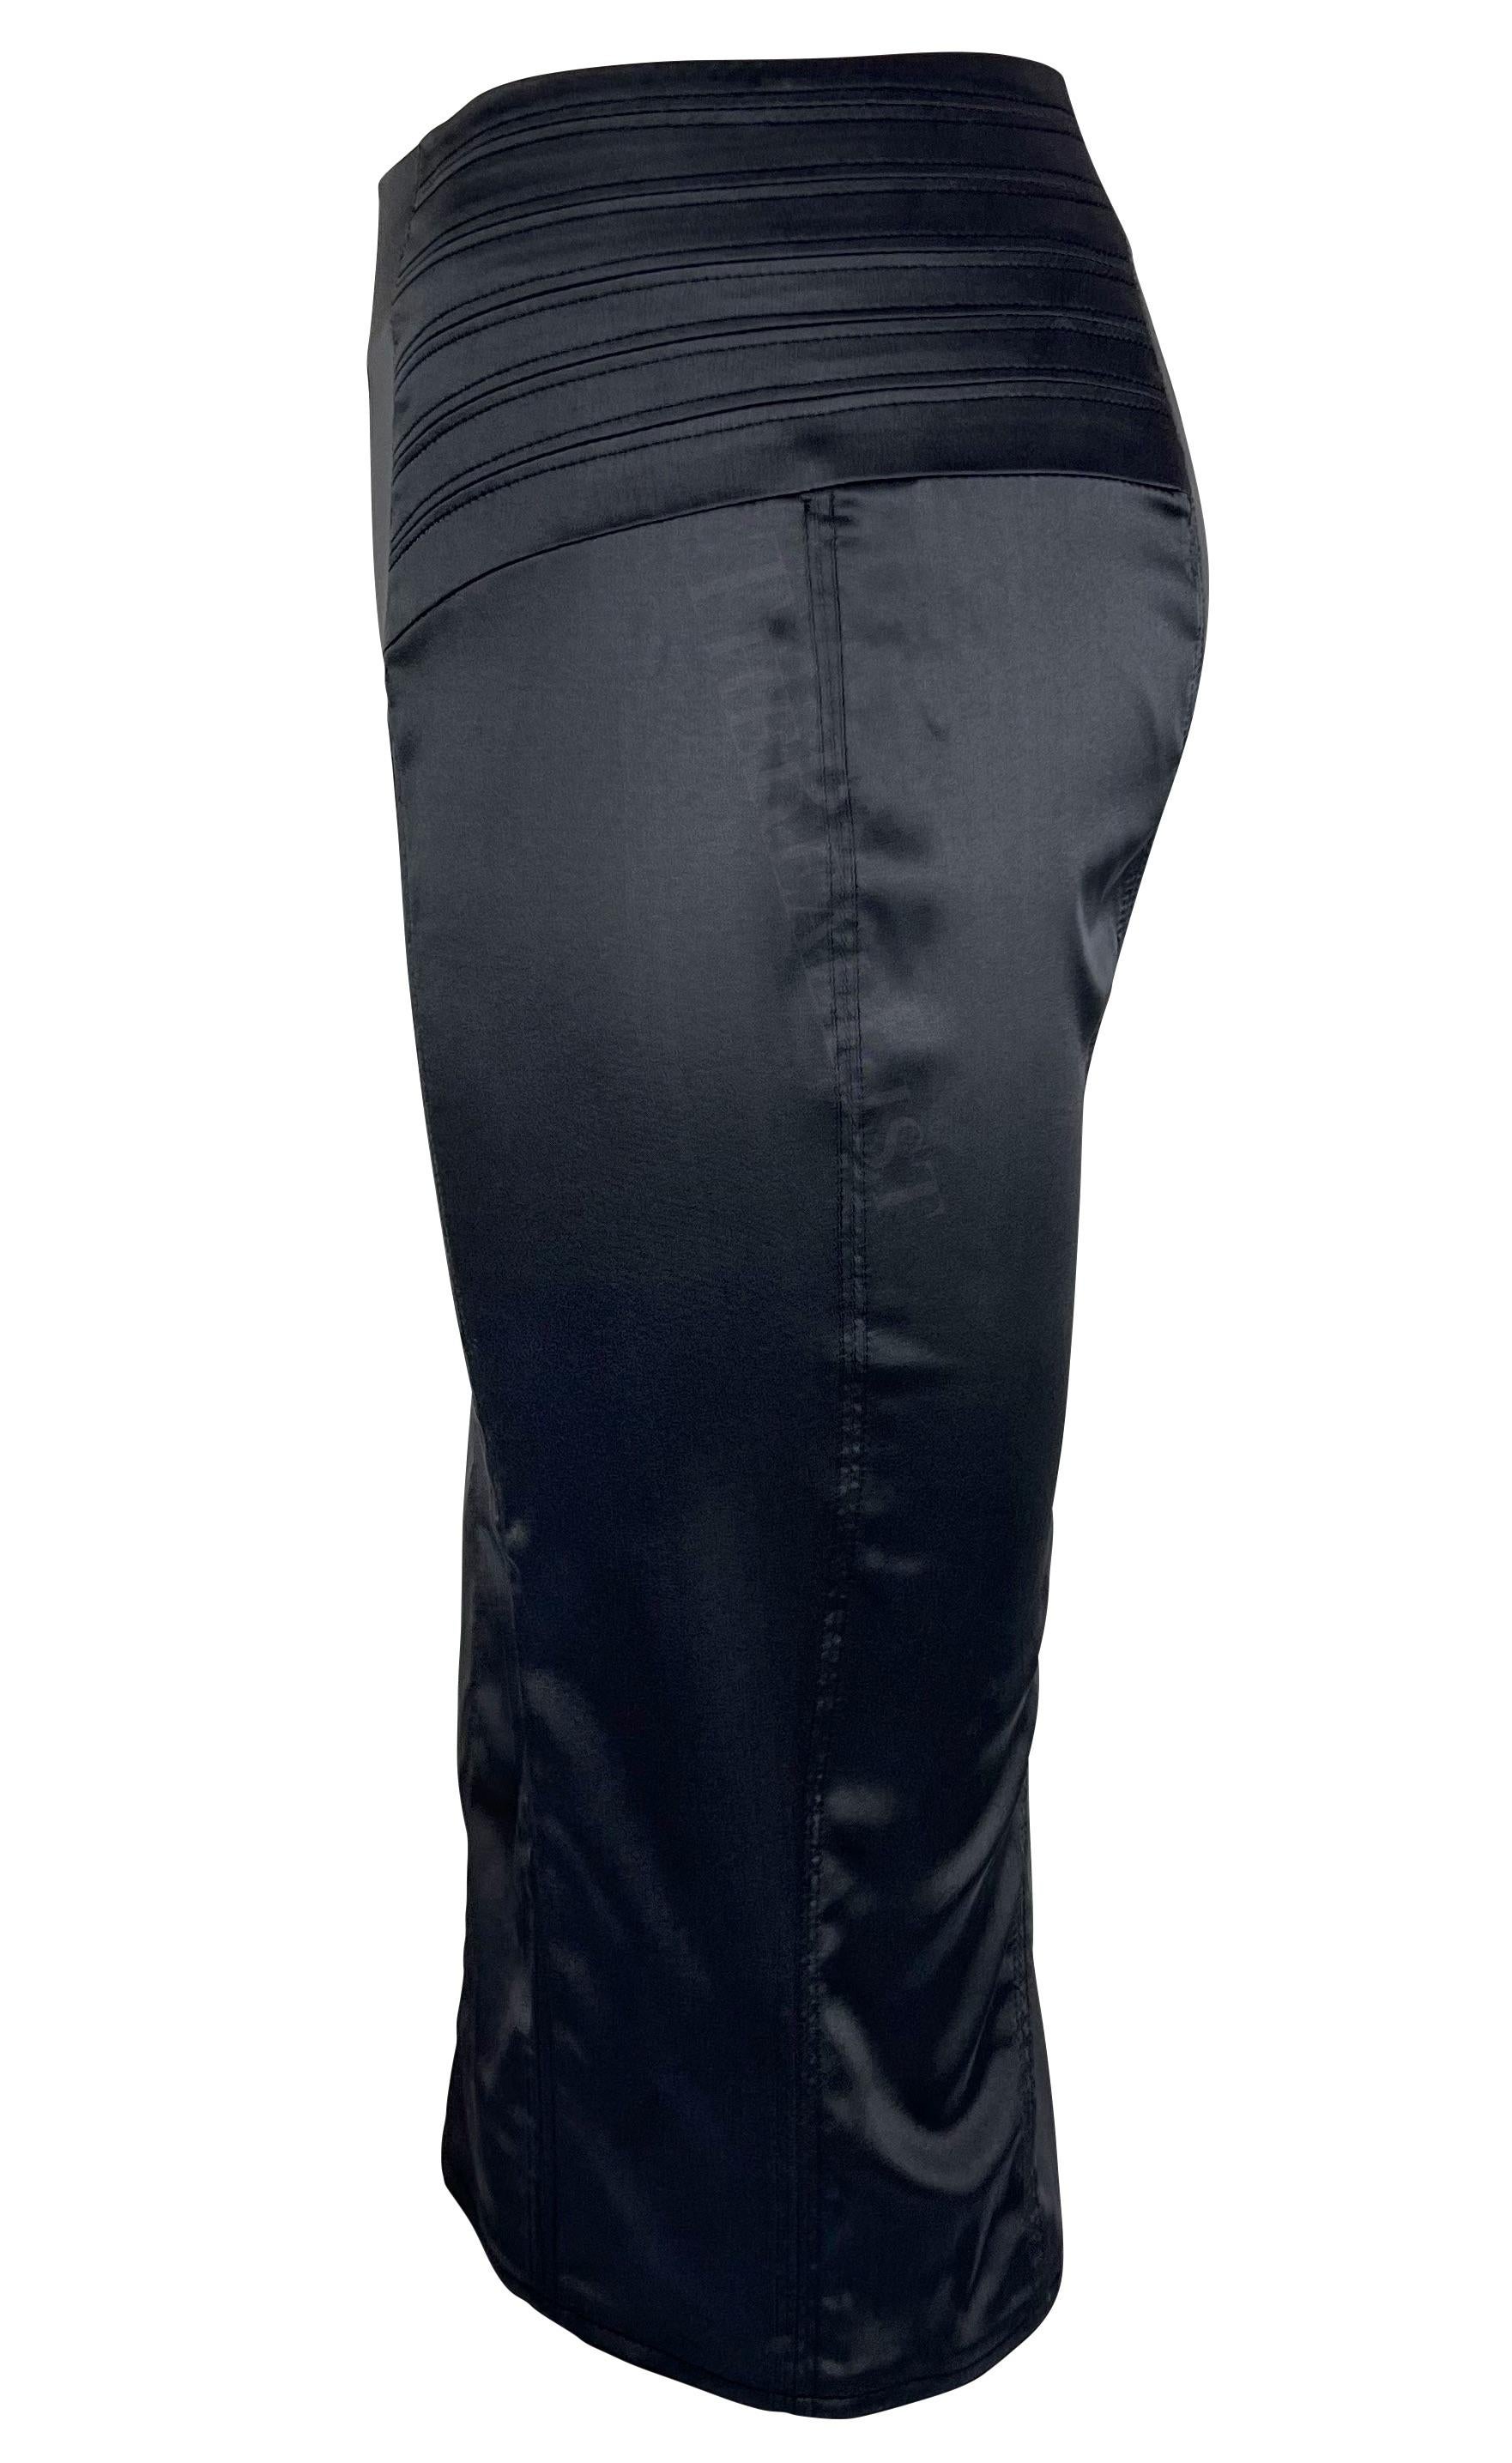 F/W 2003 Gucci by Tom Ford Grey Silk Satin Bodycon Skirt In Excellent Condition For Sale In West Hollywood, CA